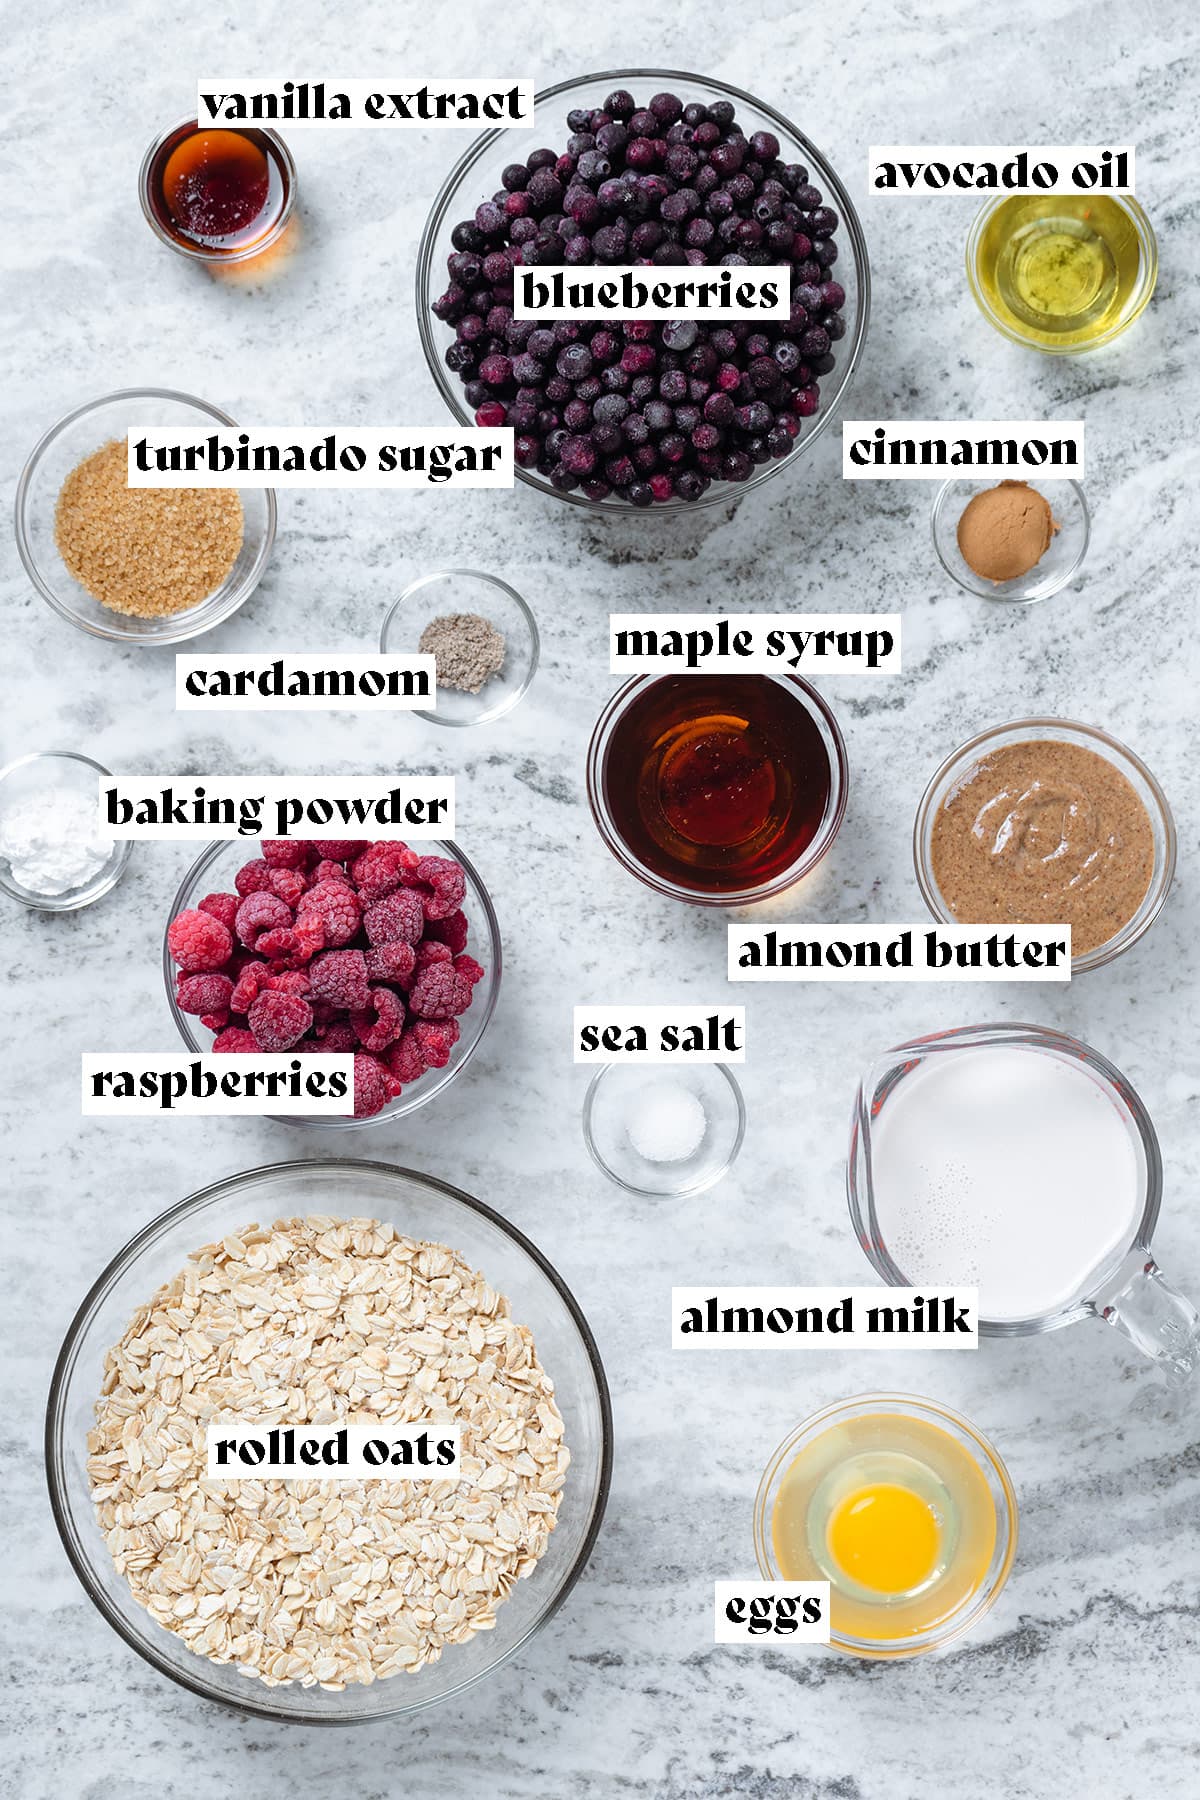 Ingredients for blueberry baked oatmeal like berries, oats, milk, and eggs on a stone background.